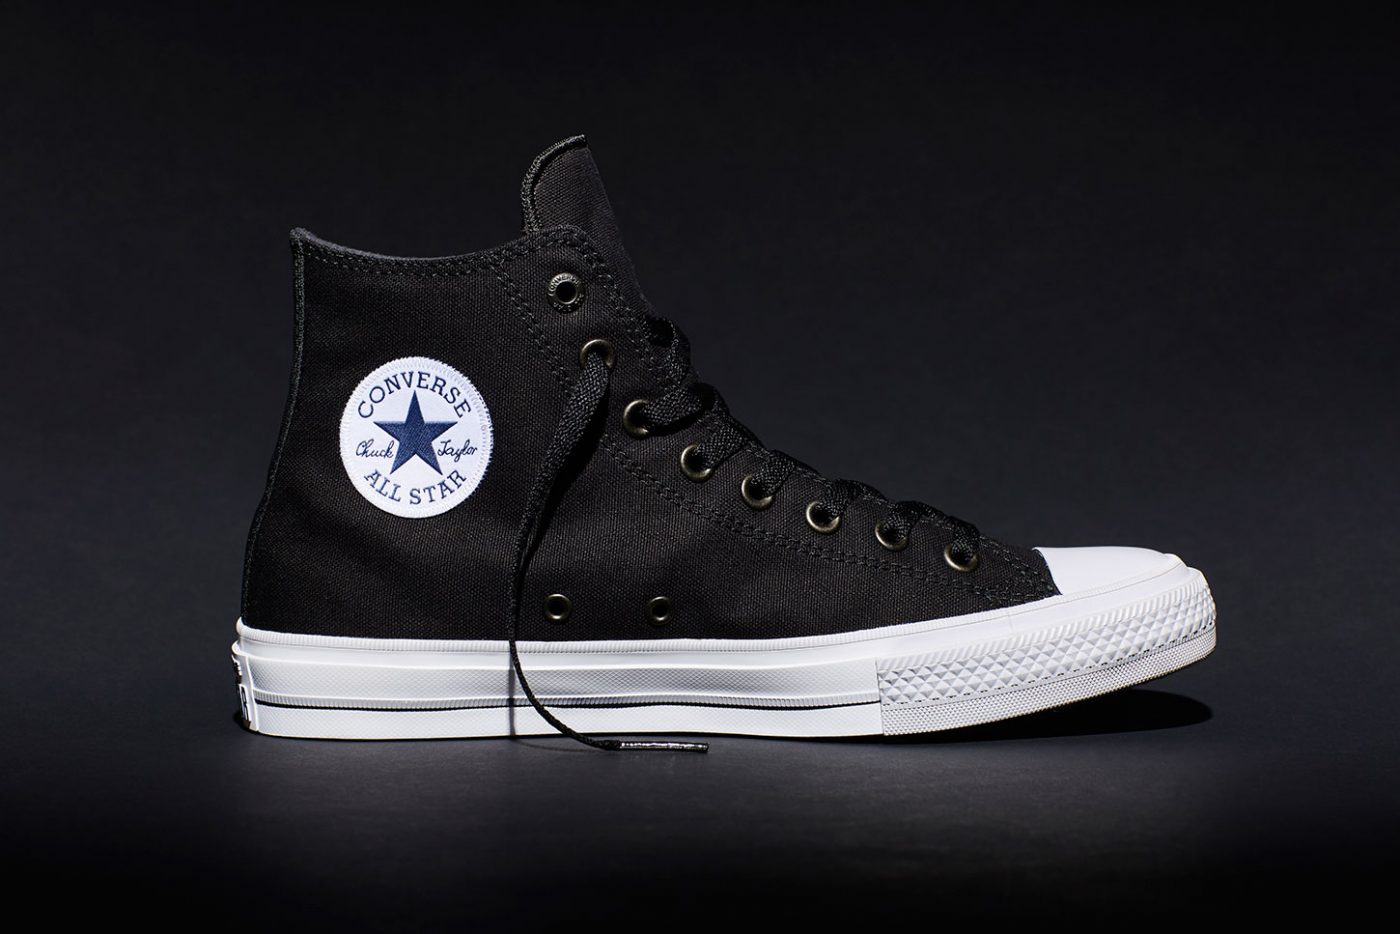 CONVERSE UNVEILS CHUCK TAYLOR ALL STAR II – Fatlace™ Since 1999